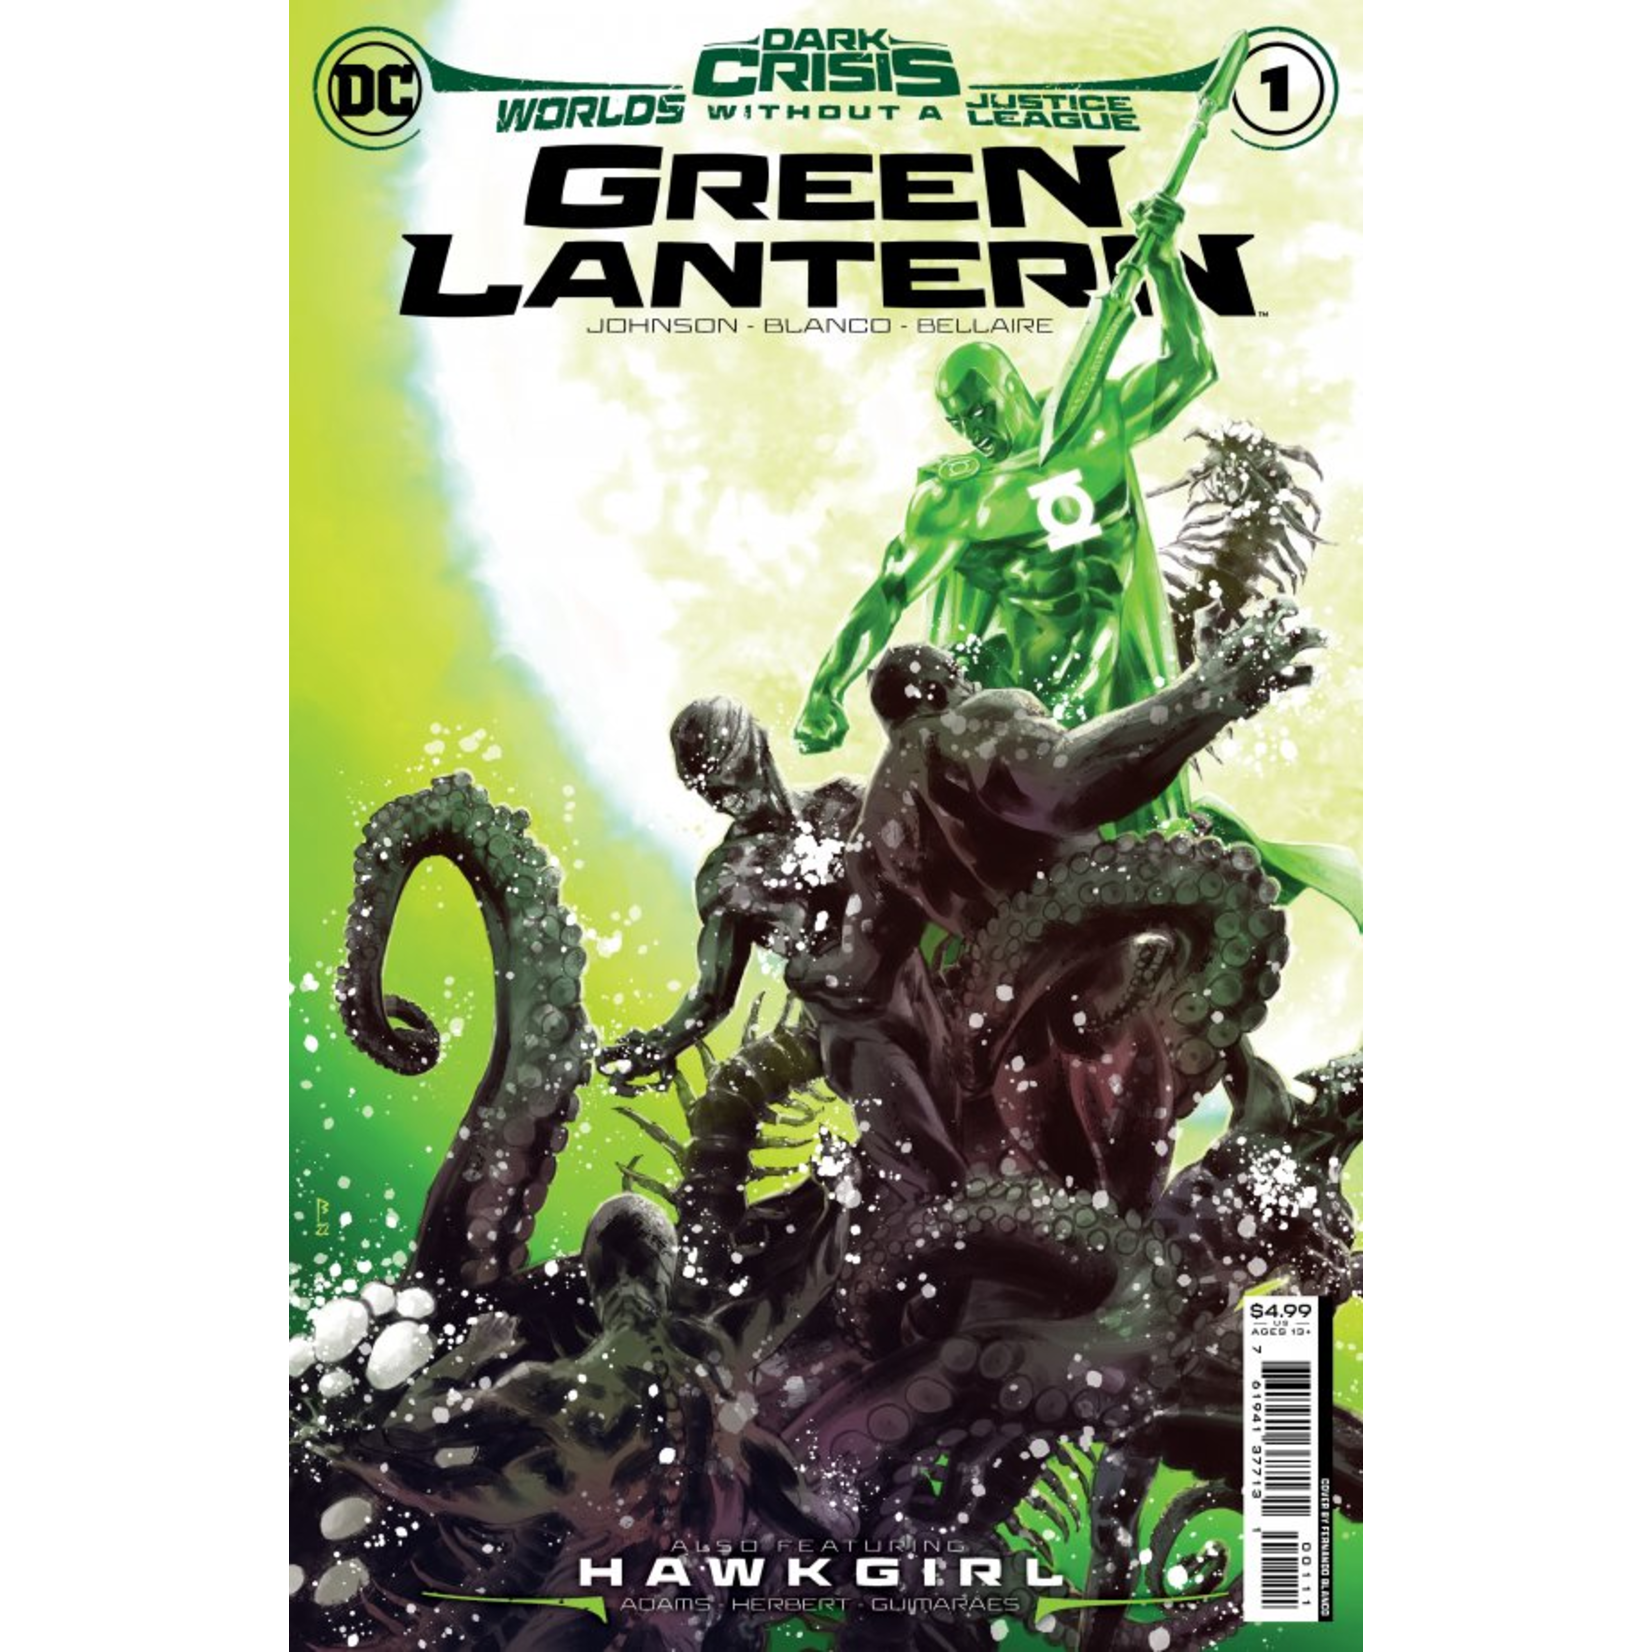 DC Comics Dark Crisis: Worlds Without a Justice League - Green Lantern #1